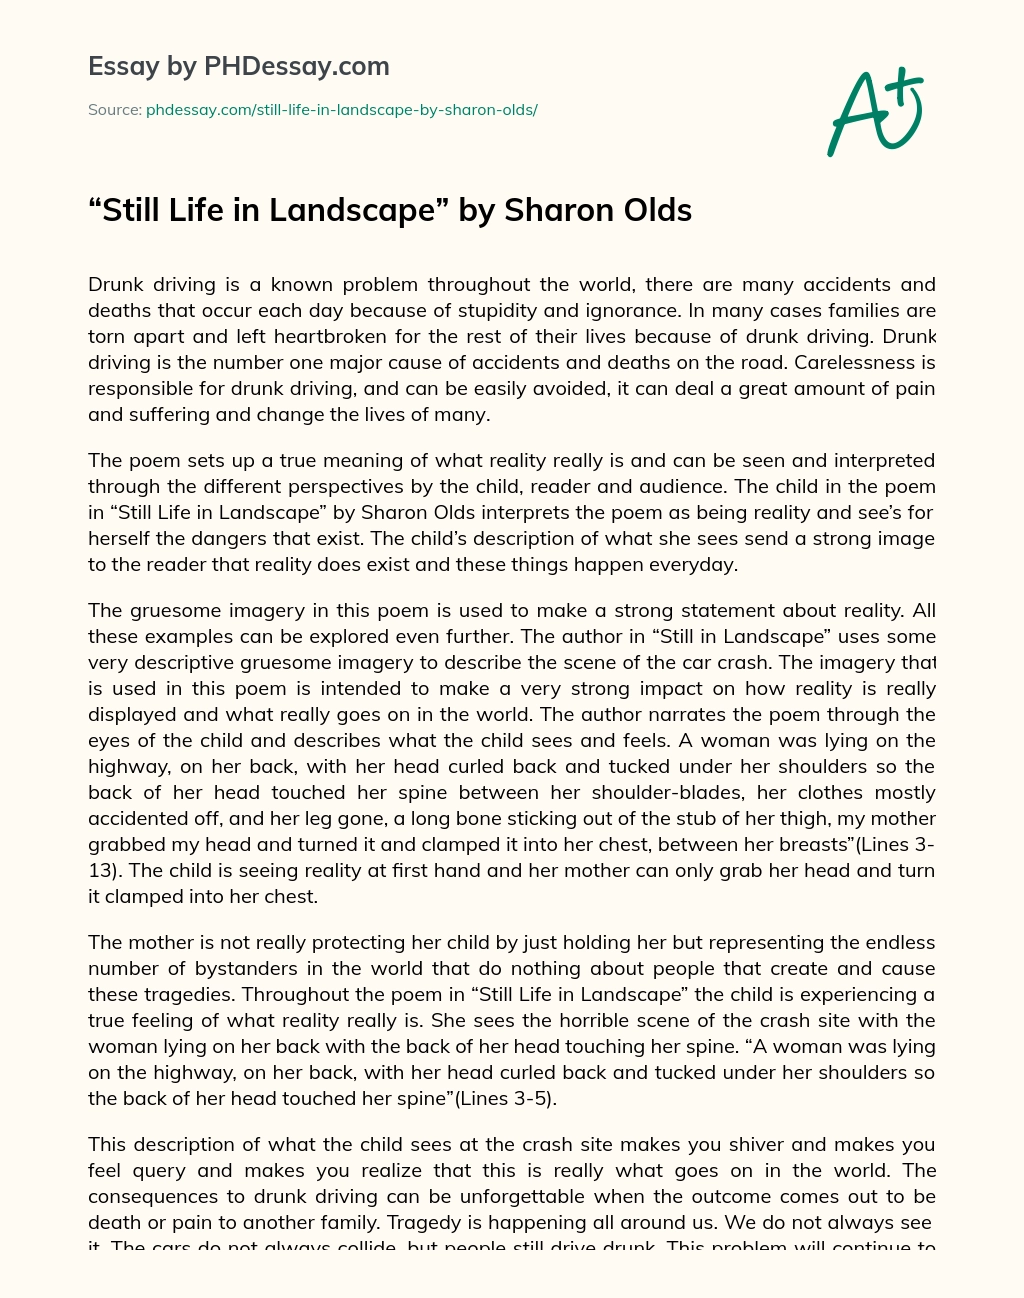 Still Life in Landscape by Sharon Olds essay